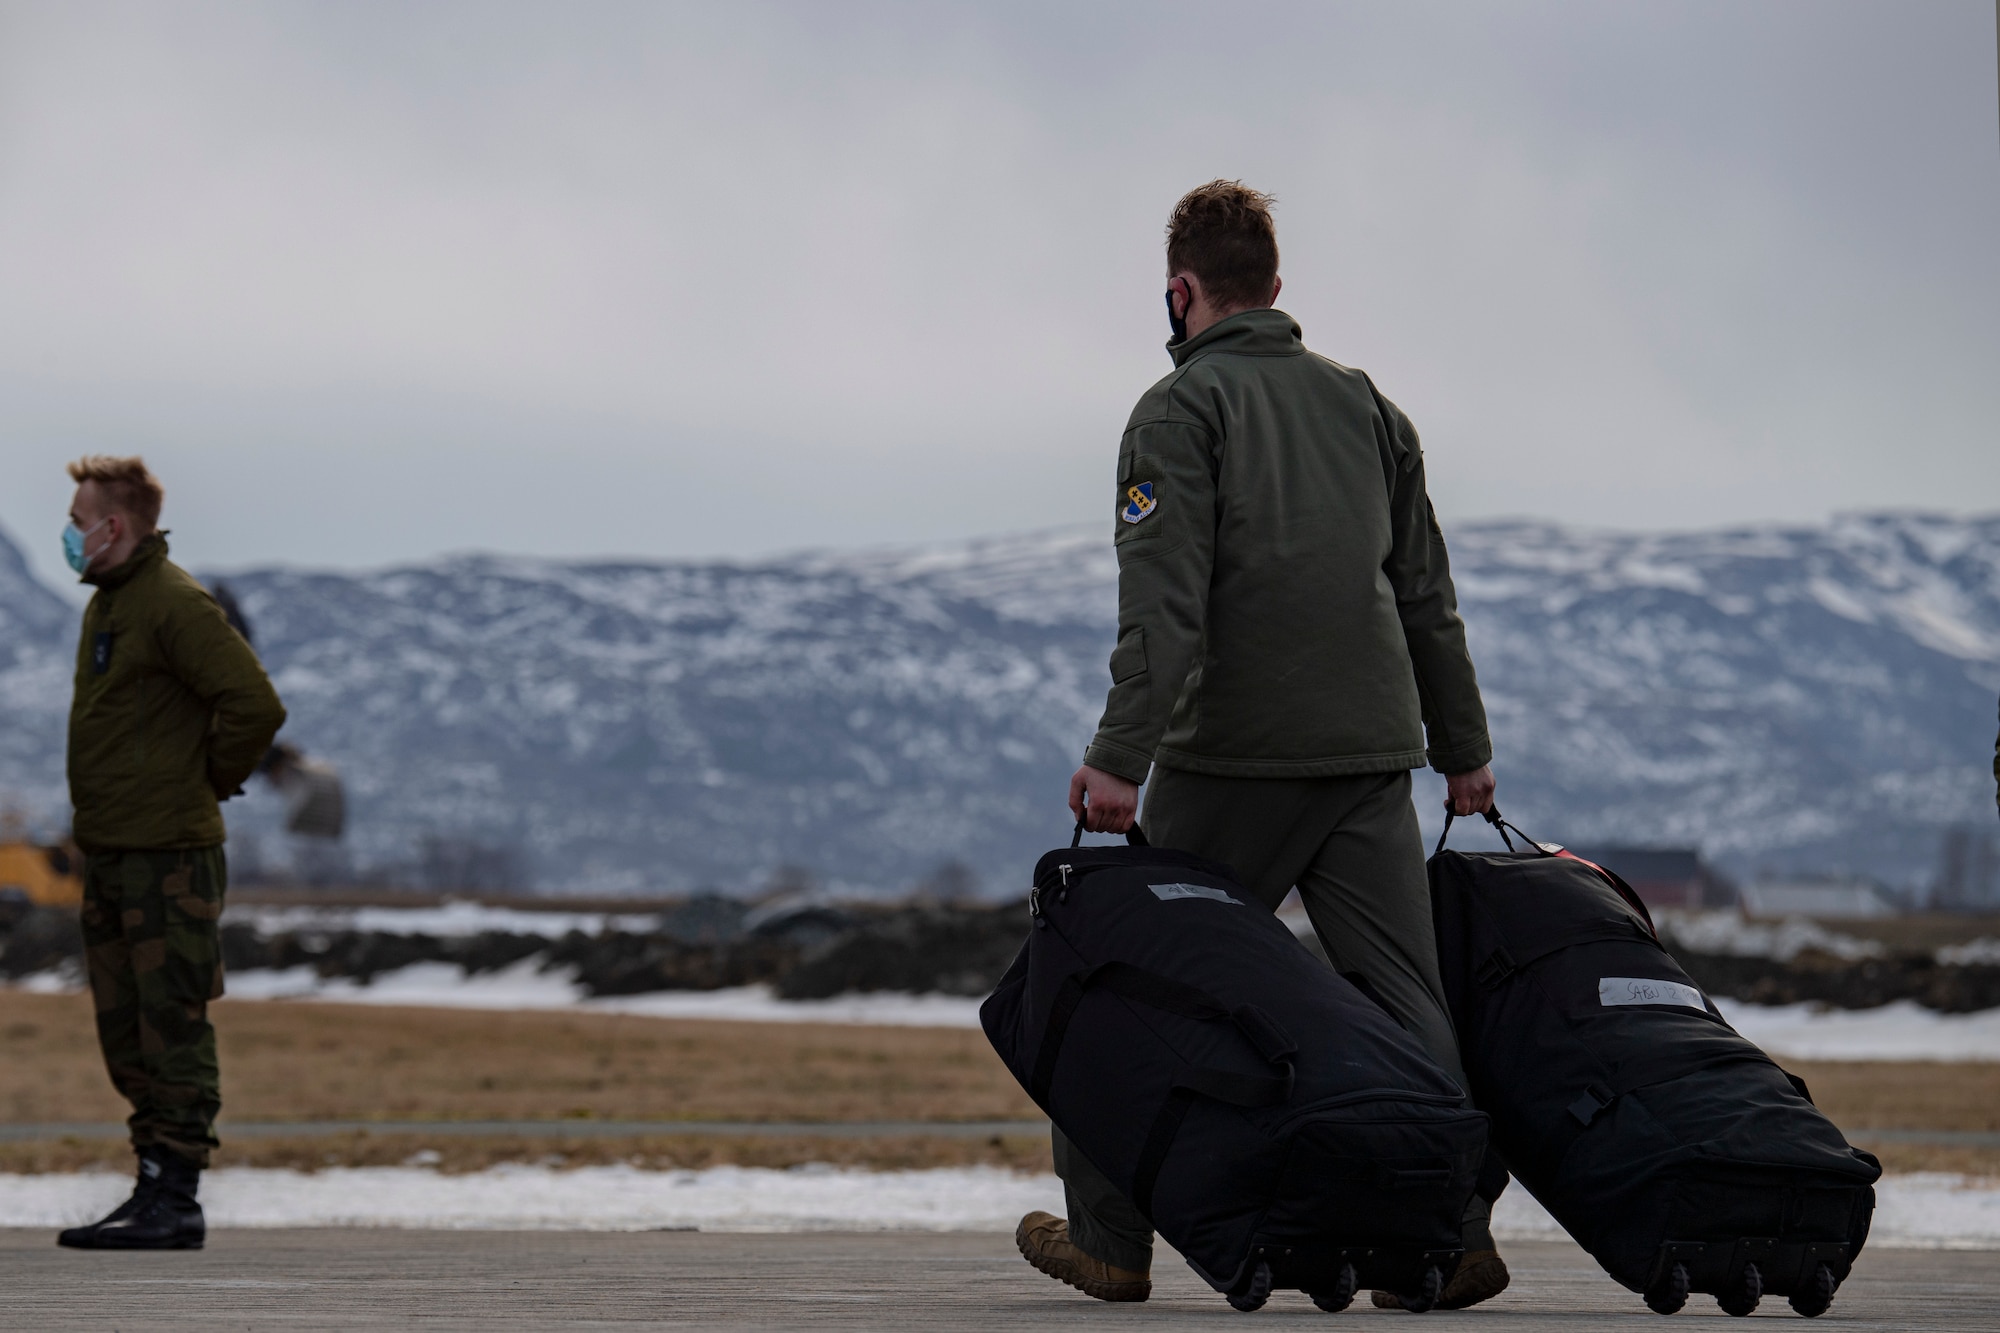 An Airman assigned to the 9th Expeditionary Squadron walks toward a bus at Ørland Air Force Station, Norway, Feb. 22, 2021. The 9th EBS deployed to Norway in support of a Bomber Task Force deployment where they will integrate with ally and partner forces. Integrating with the Royal Norwegian Air Force in the European Theater and the Arctic provides specific and thorough training experience for aircrew. (U.S. Air Force photo by Airman 1st Class Colin Hollowell)